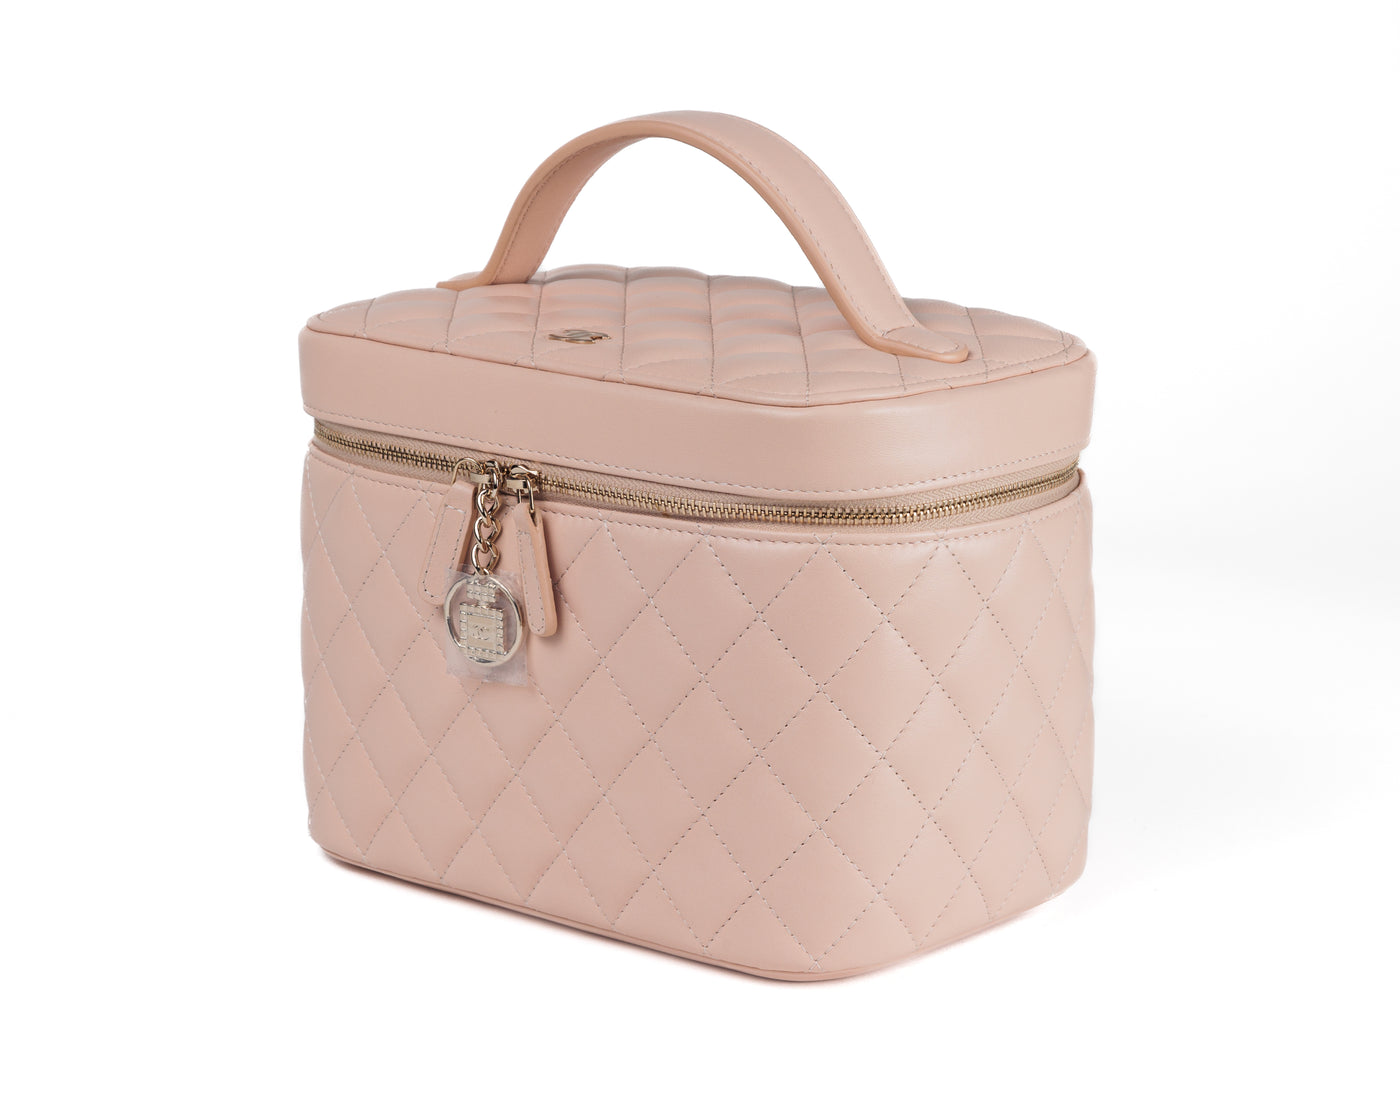 Chanel Blush Pink Lambskin Vanity Case with Gold Hardware